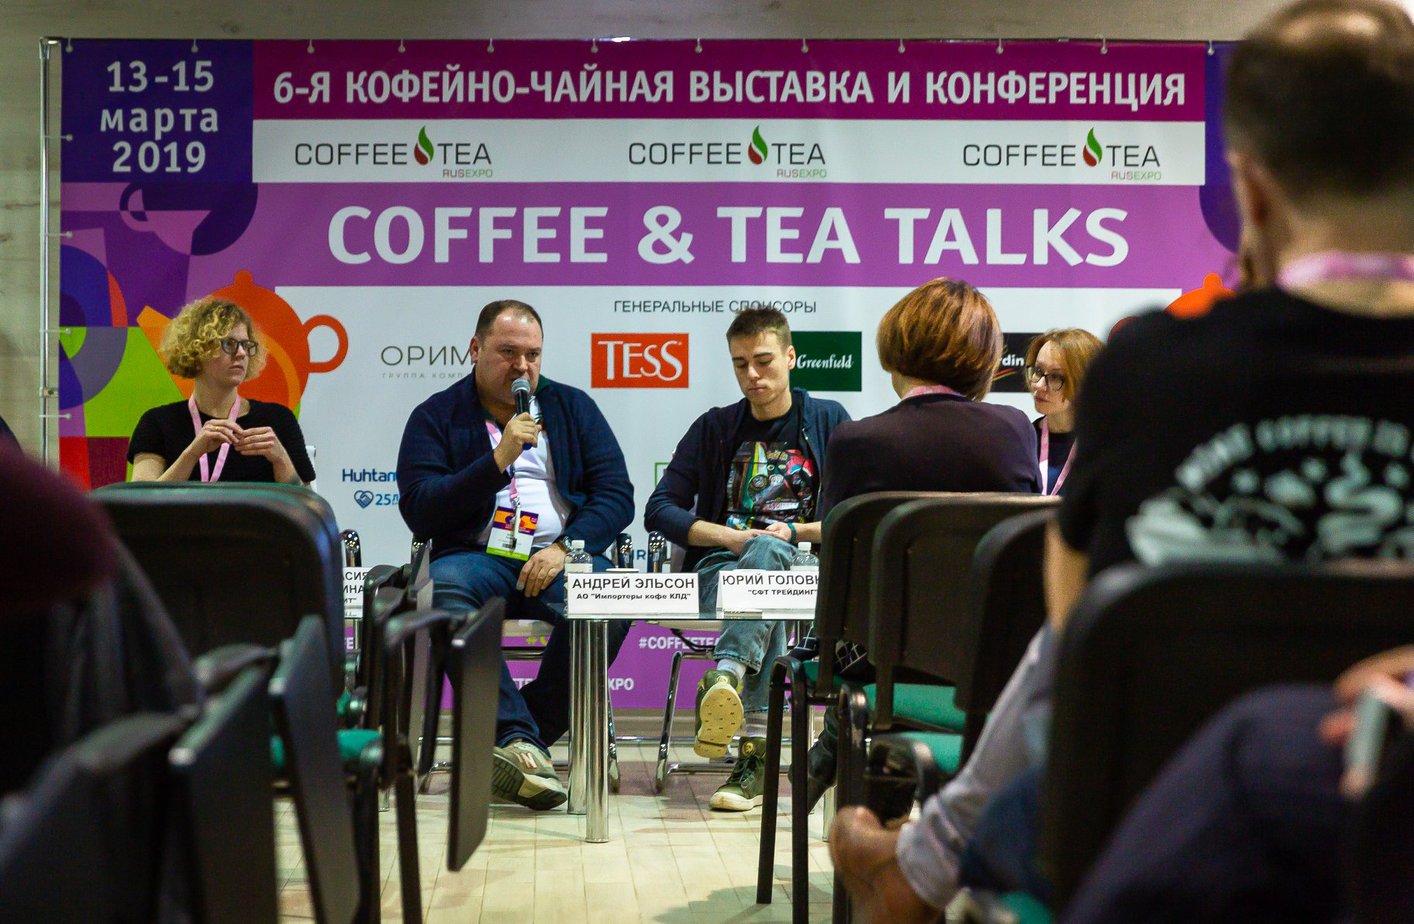 COFFEE & TEA RUSSIAN EXPO WAS SUCCESSFULLY HELD IN MOSCOW